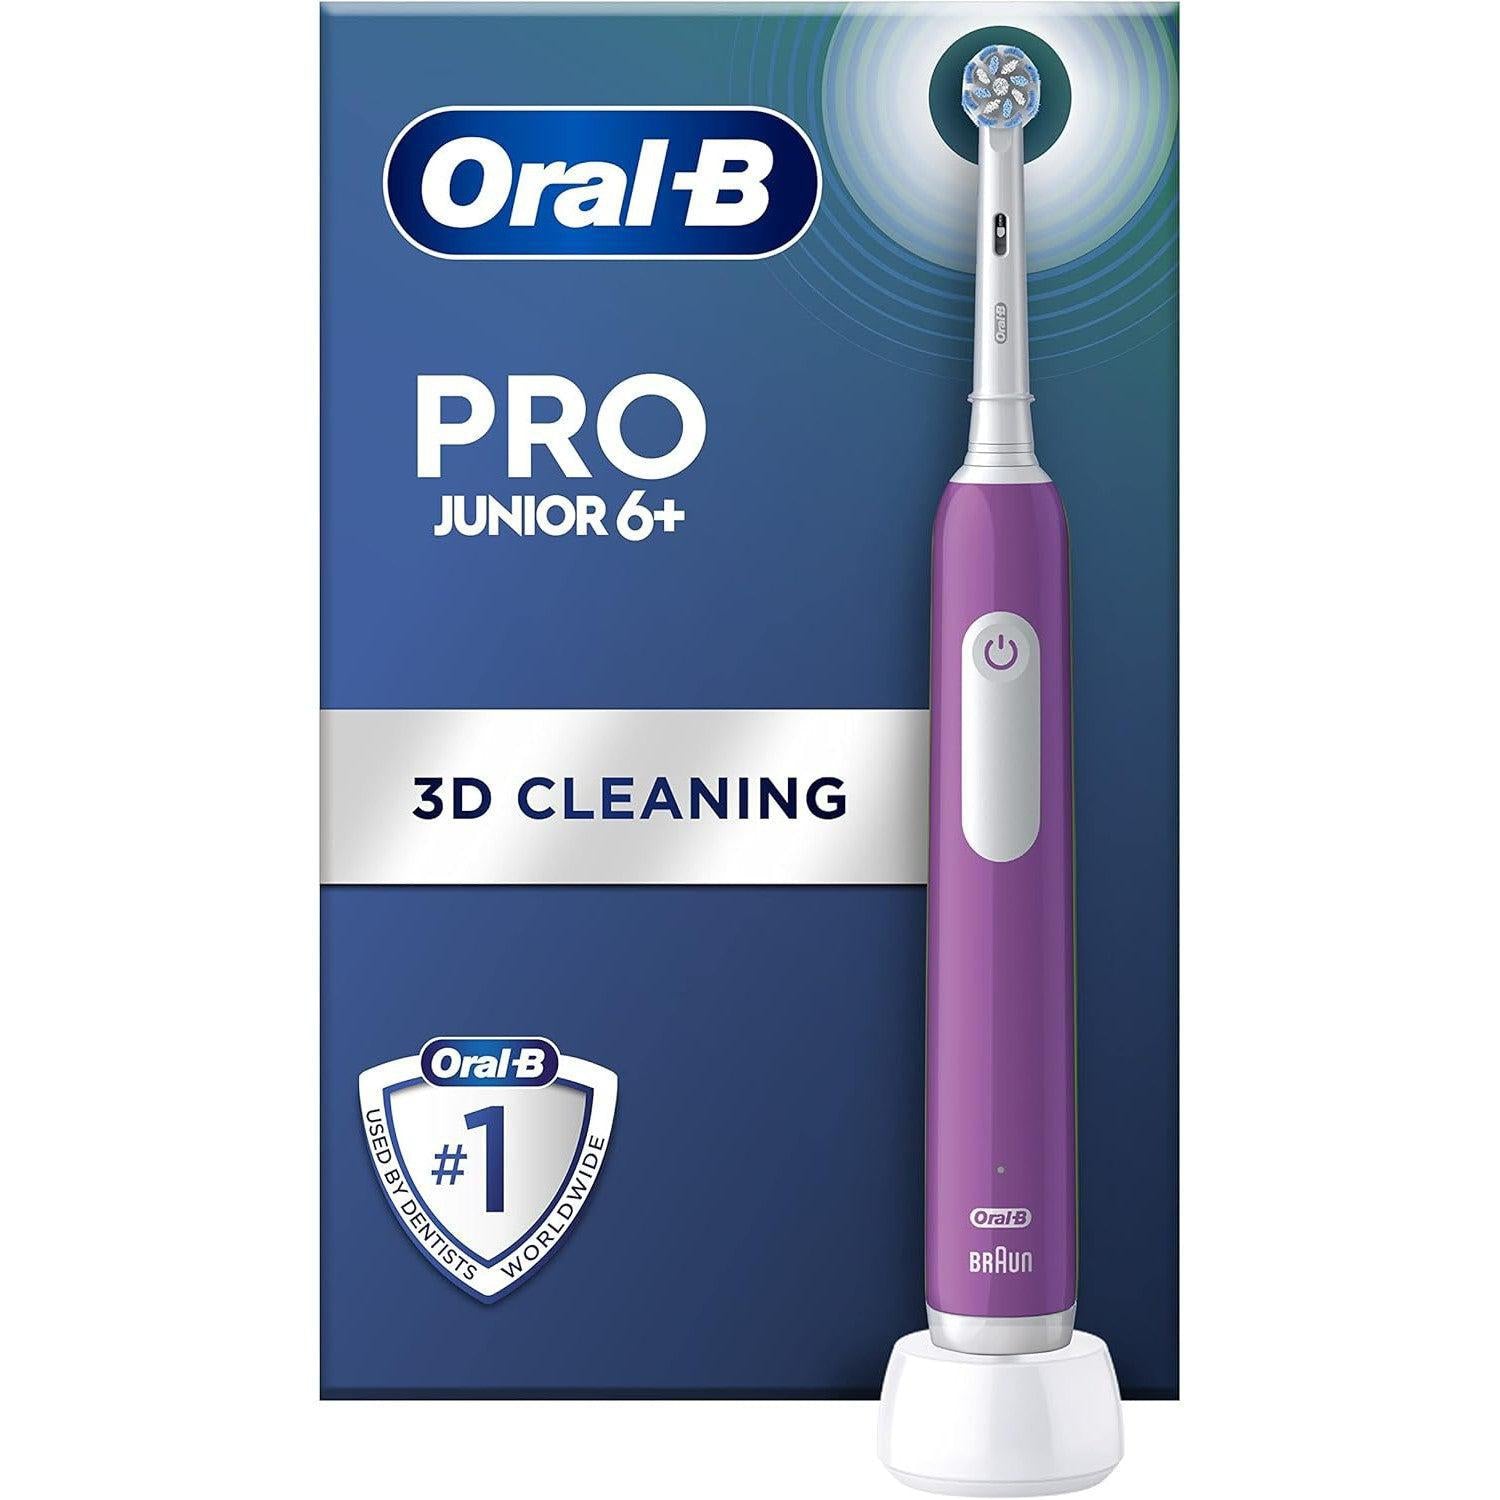 Oral-B Pro Junior Kids Electric Toothbrush, Sensitive Mode, For Ages 6+, Purple